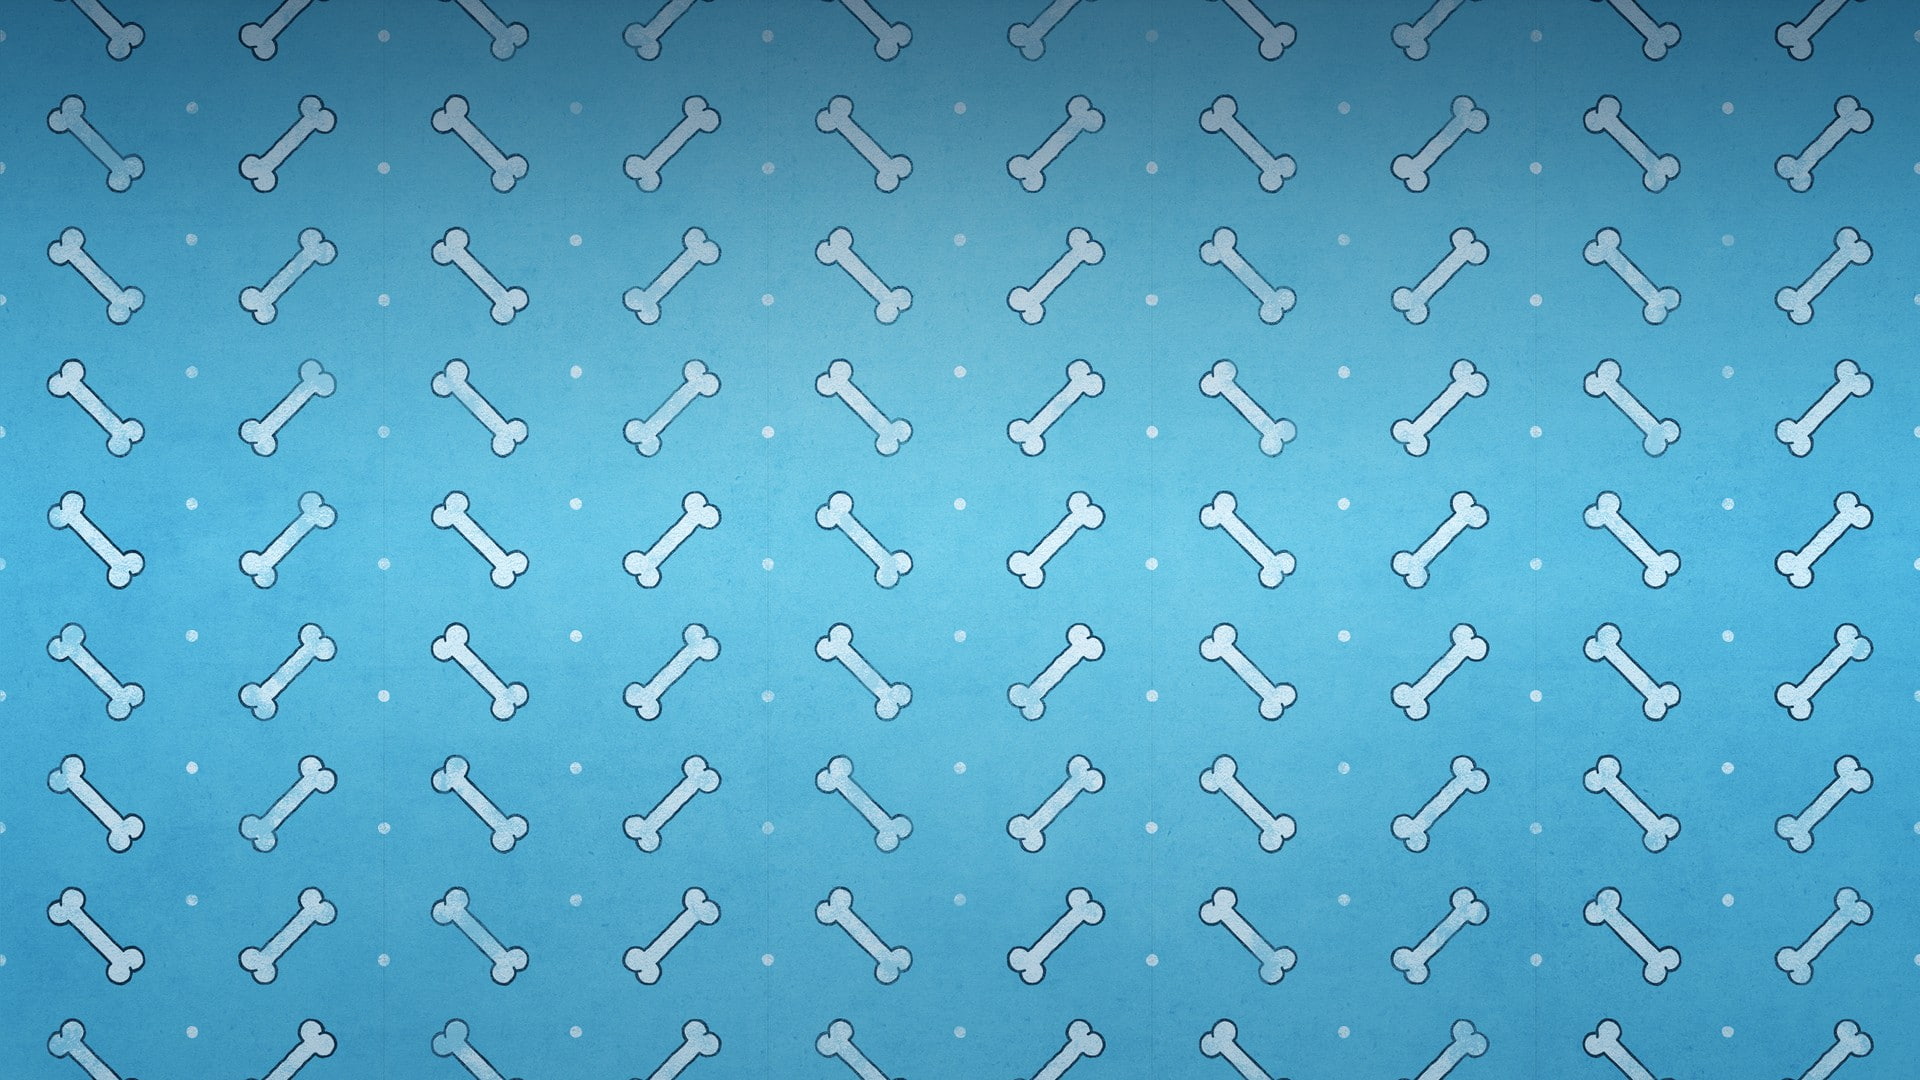 bones, Wallace and Gromit, texture, backgrounds, blue, full frame